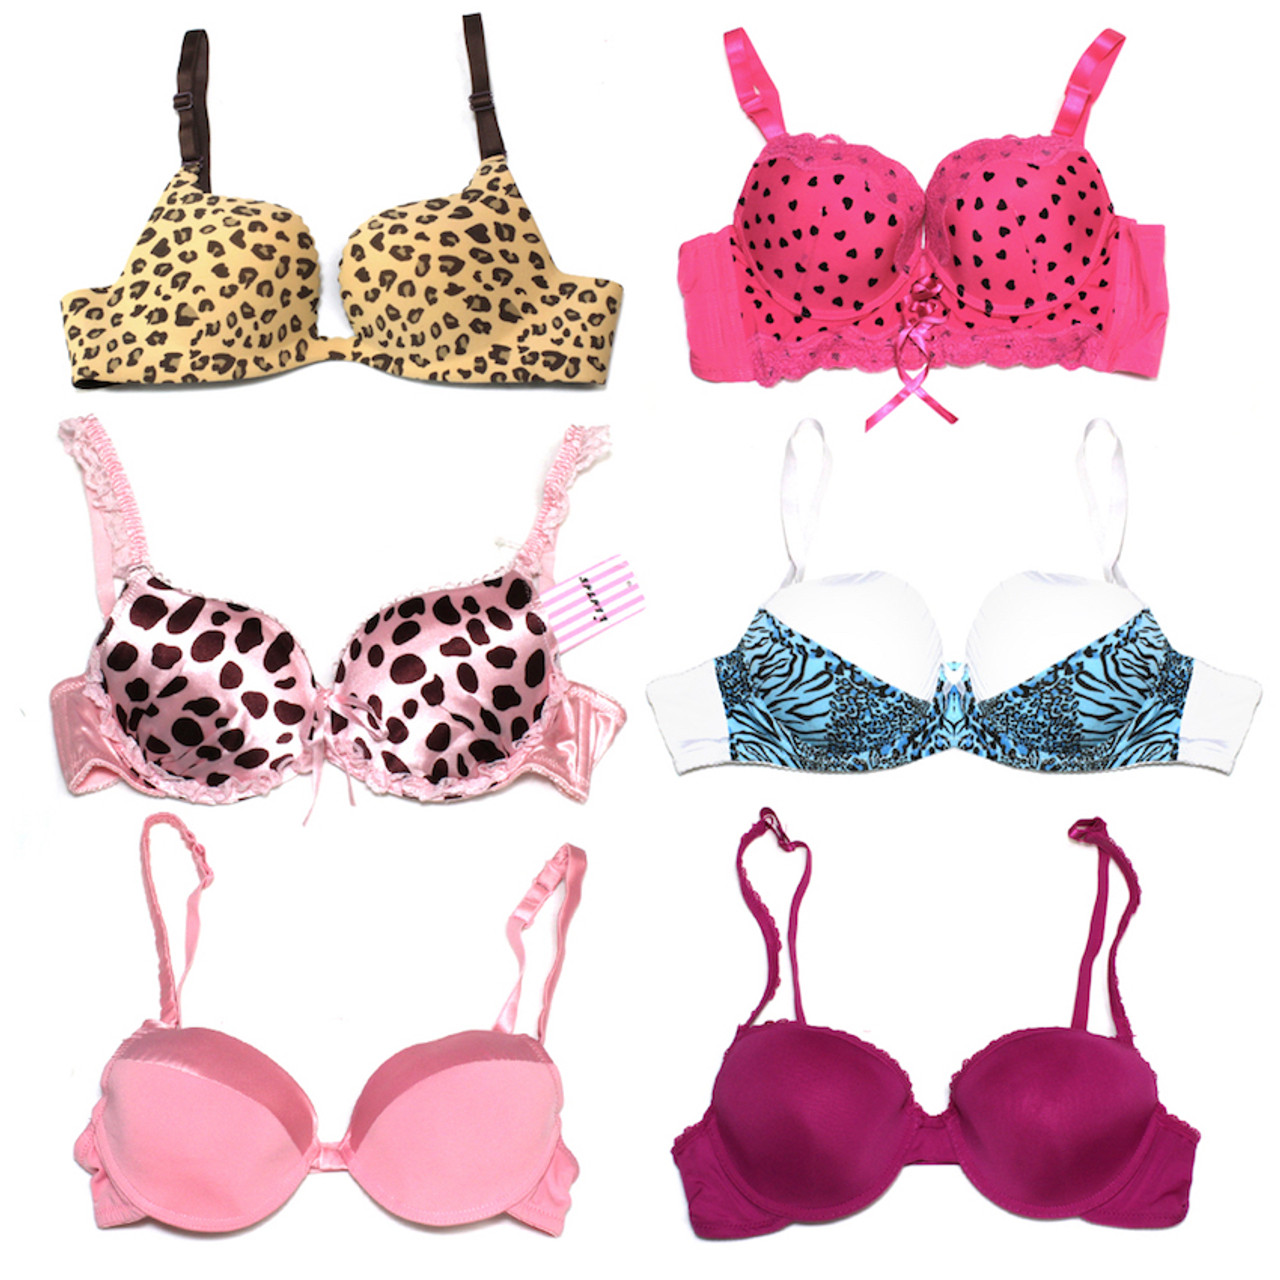 36 Wholesale Ellies Lady's Double PusH-Up Underwire Padded BrA